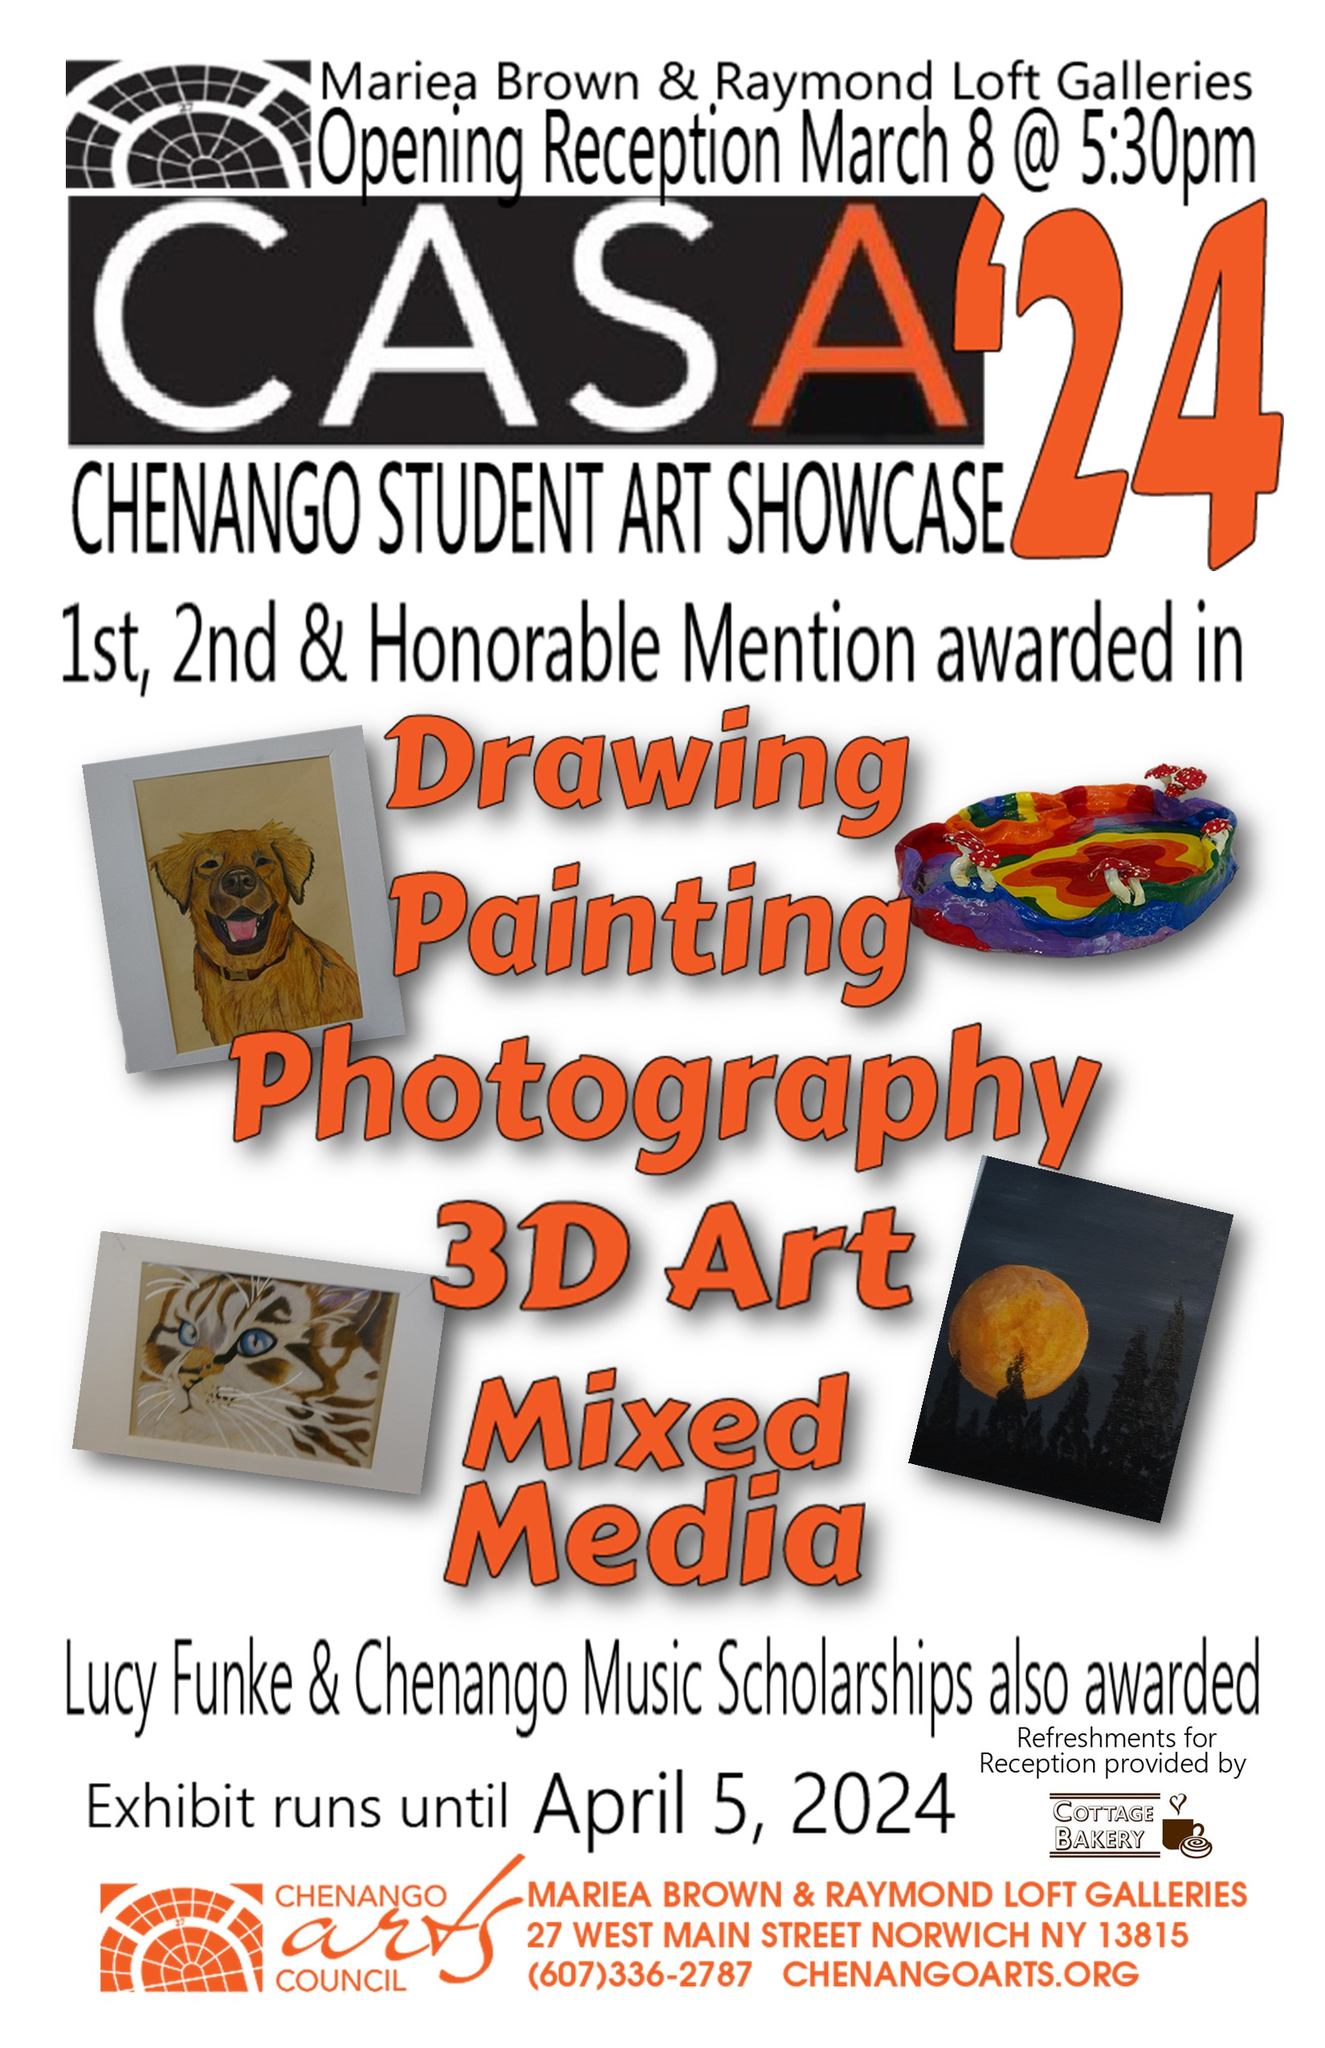 Mariea VBrown & Raymond Loft Galleries - Opening Reception March 8 @ 5:30 p.m. CASA '24 Chengange Student Art Showcase 1st, 2nd & Honorable Mention awarded in Drawing Painting Photography, 3d Art, Mixed Media, Lucy Funke & Chenango Music Scholarships also awarded. Exhibit runs until April 5th, 2024. Chenango Arts Council. Mariea Brown & Raymond Loft Galleries 27 West Main Street Norwich NY 13815 (607) 336-2787 ChenangoArts.org. Refreshments for Reception Provided by Cottage Bakery